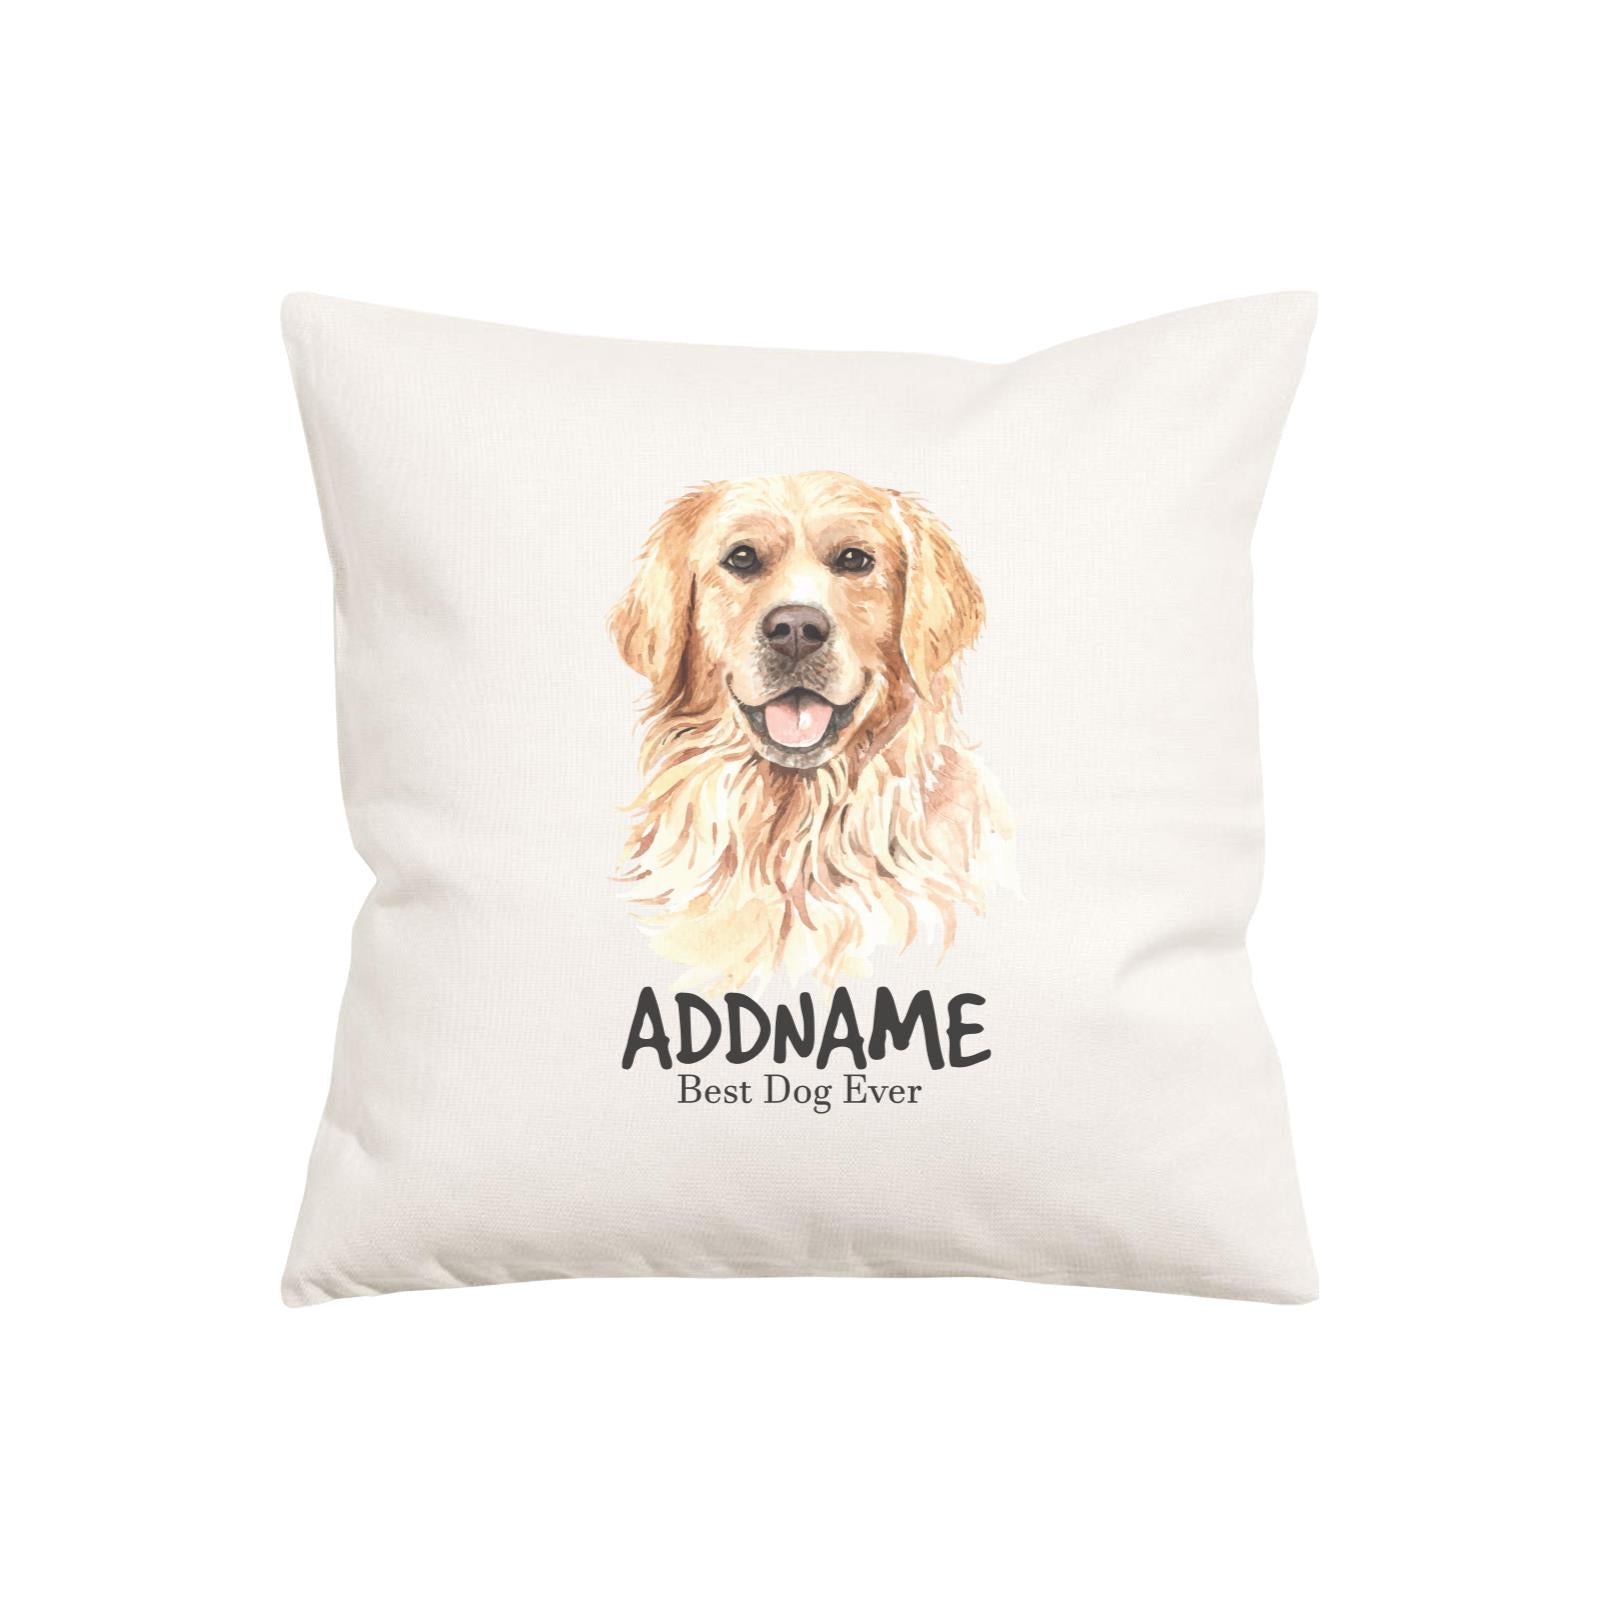 Watercolor Dog Series Golden Retriever Happy Best Dog Ever Addname Pillow Cushion